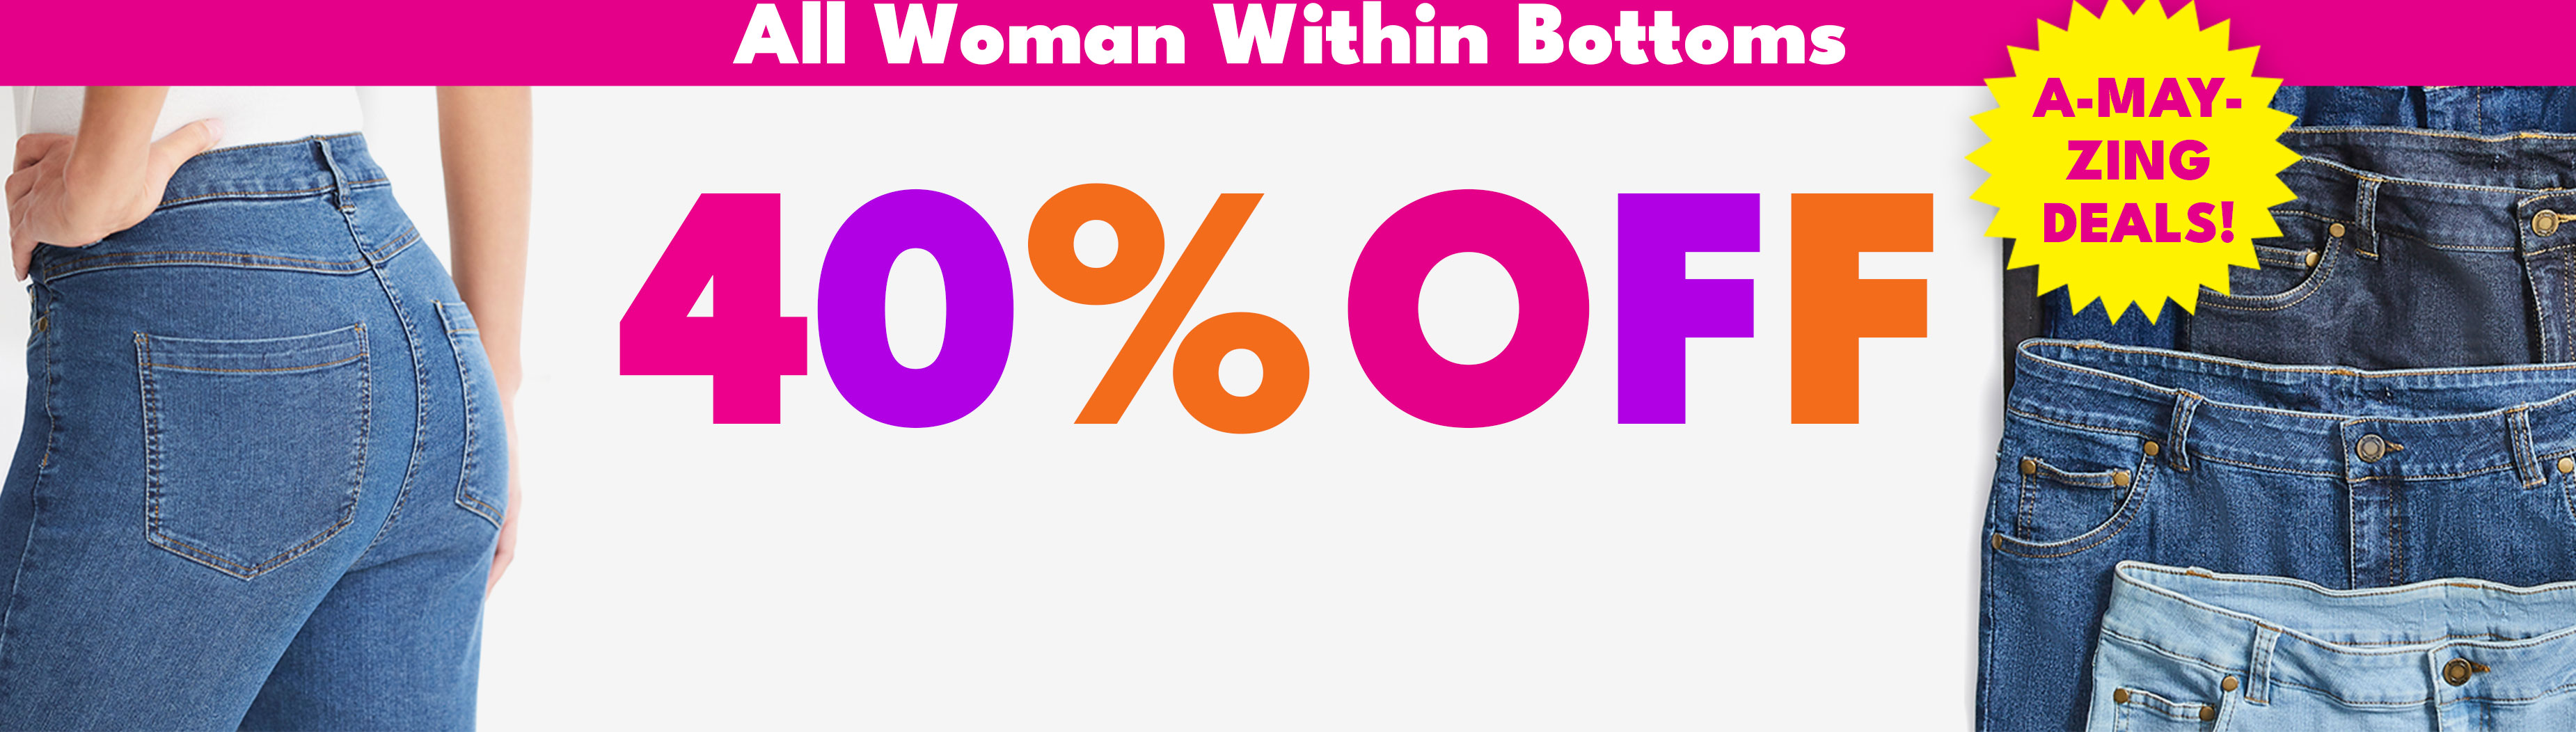 A-may-zing deals! All Woman within bottoms 40% off shop the sale 